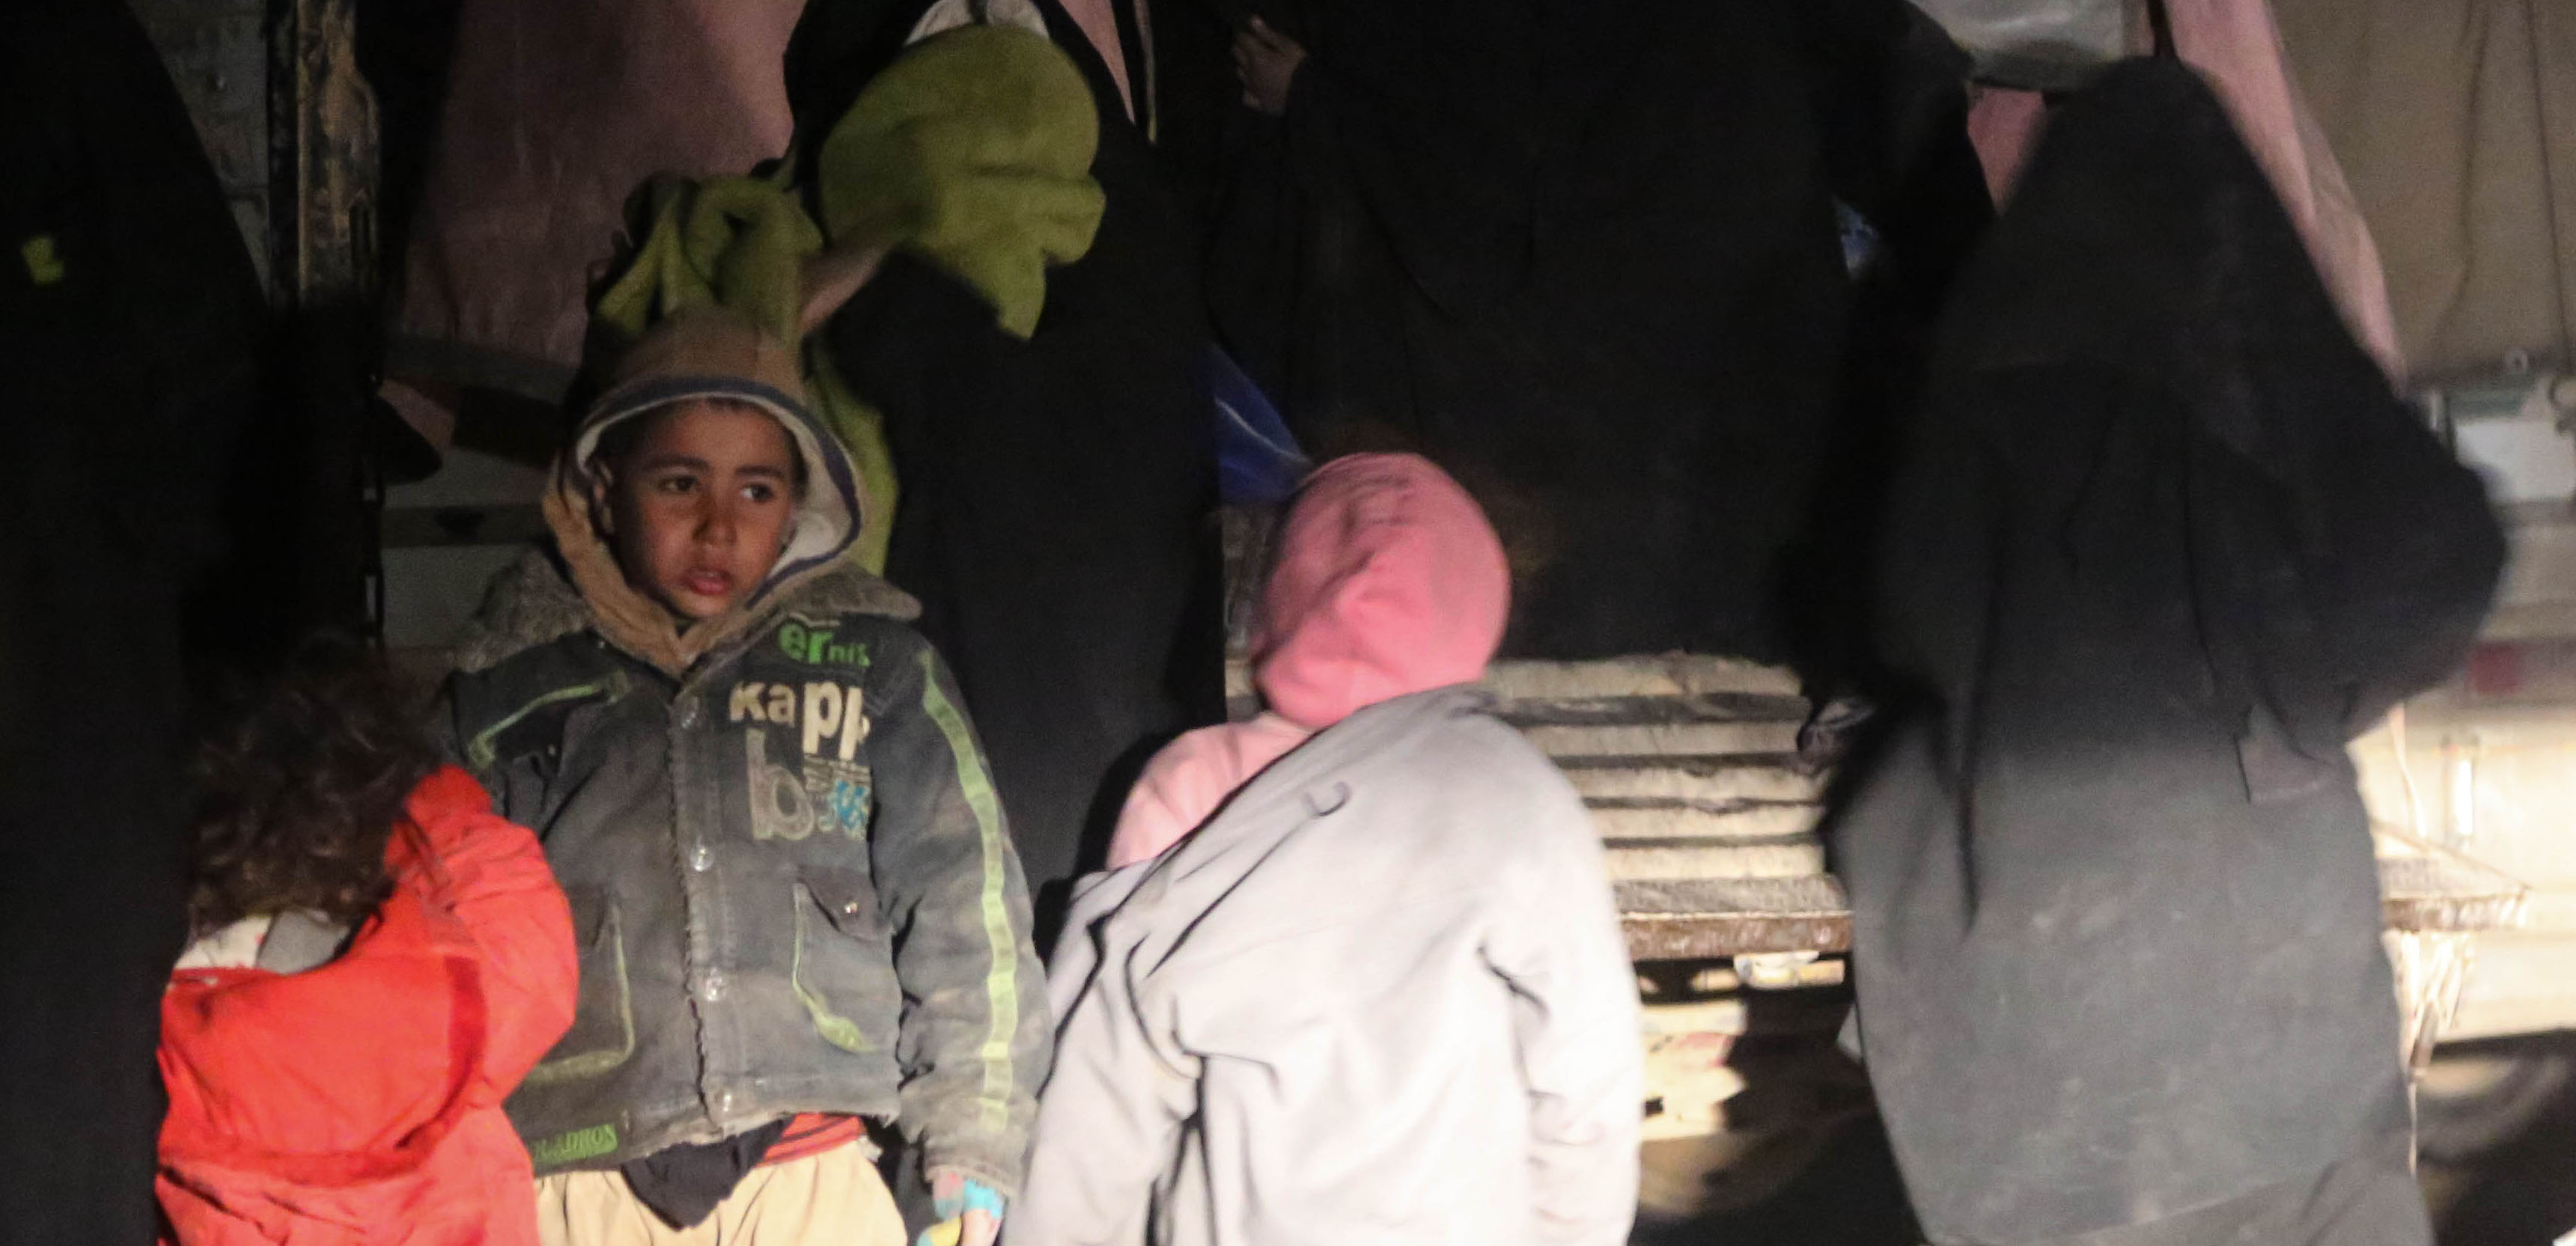 Help save the lives of 10,000 Syrians fleeing ISIS